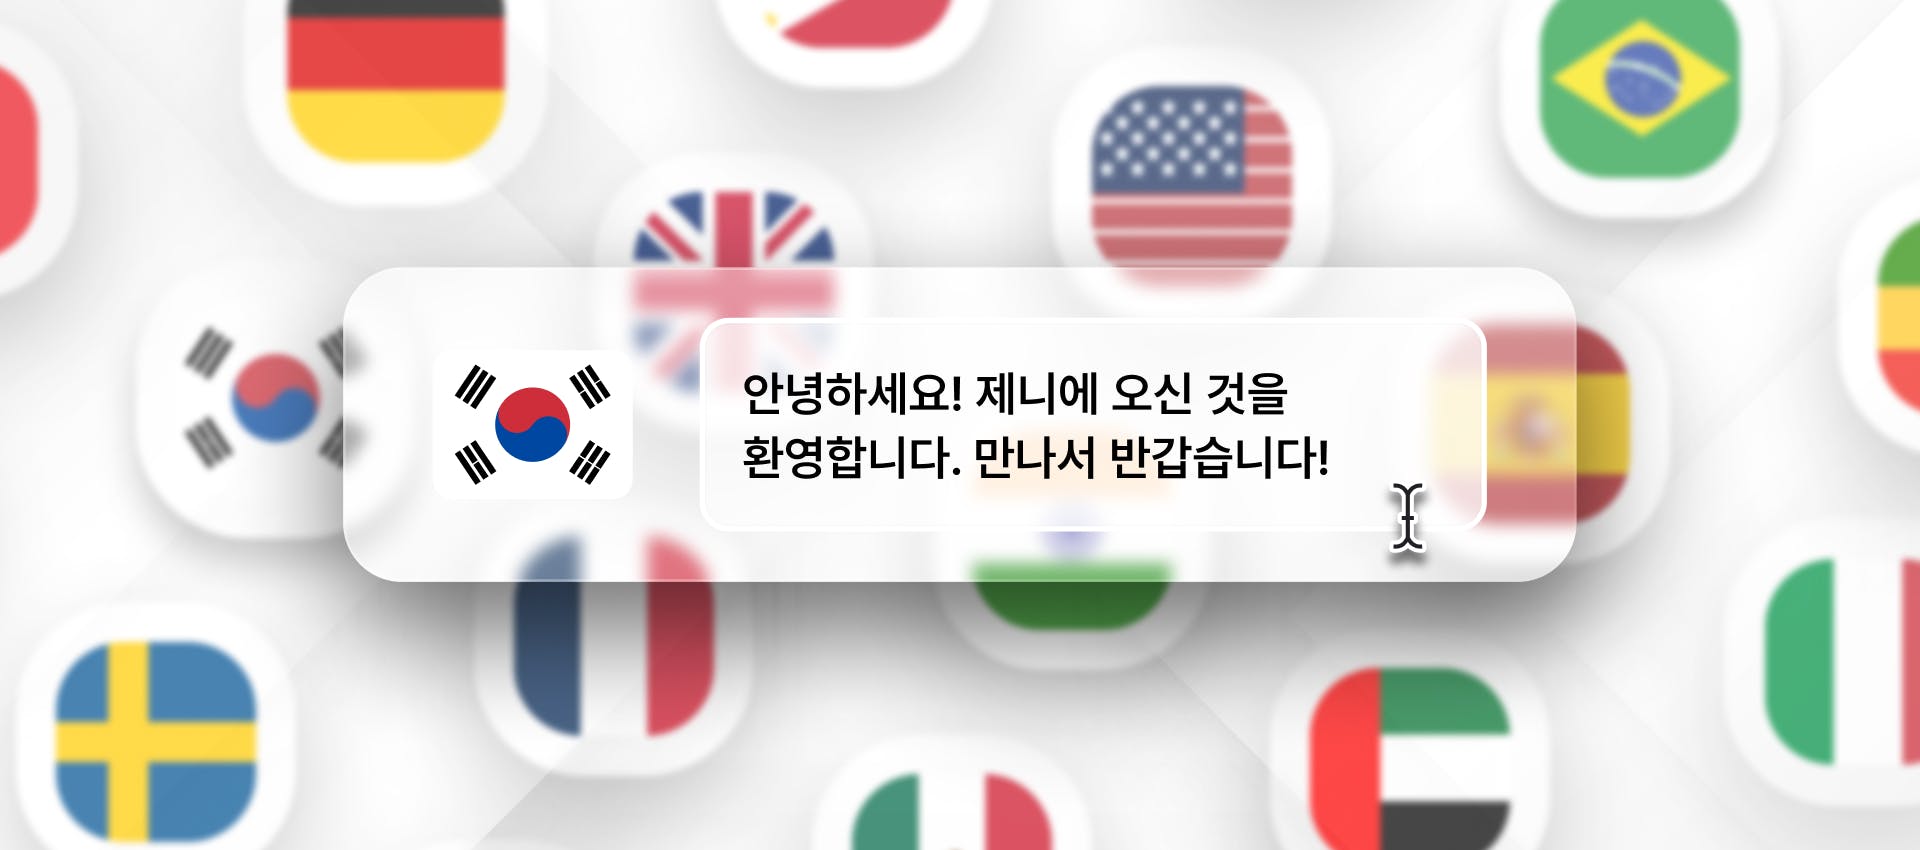 Korean phrase for TTS generation with different flags in the background